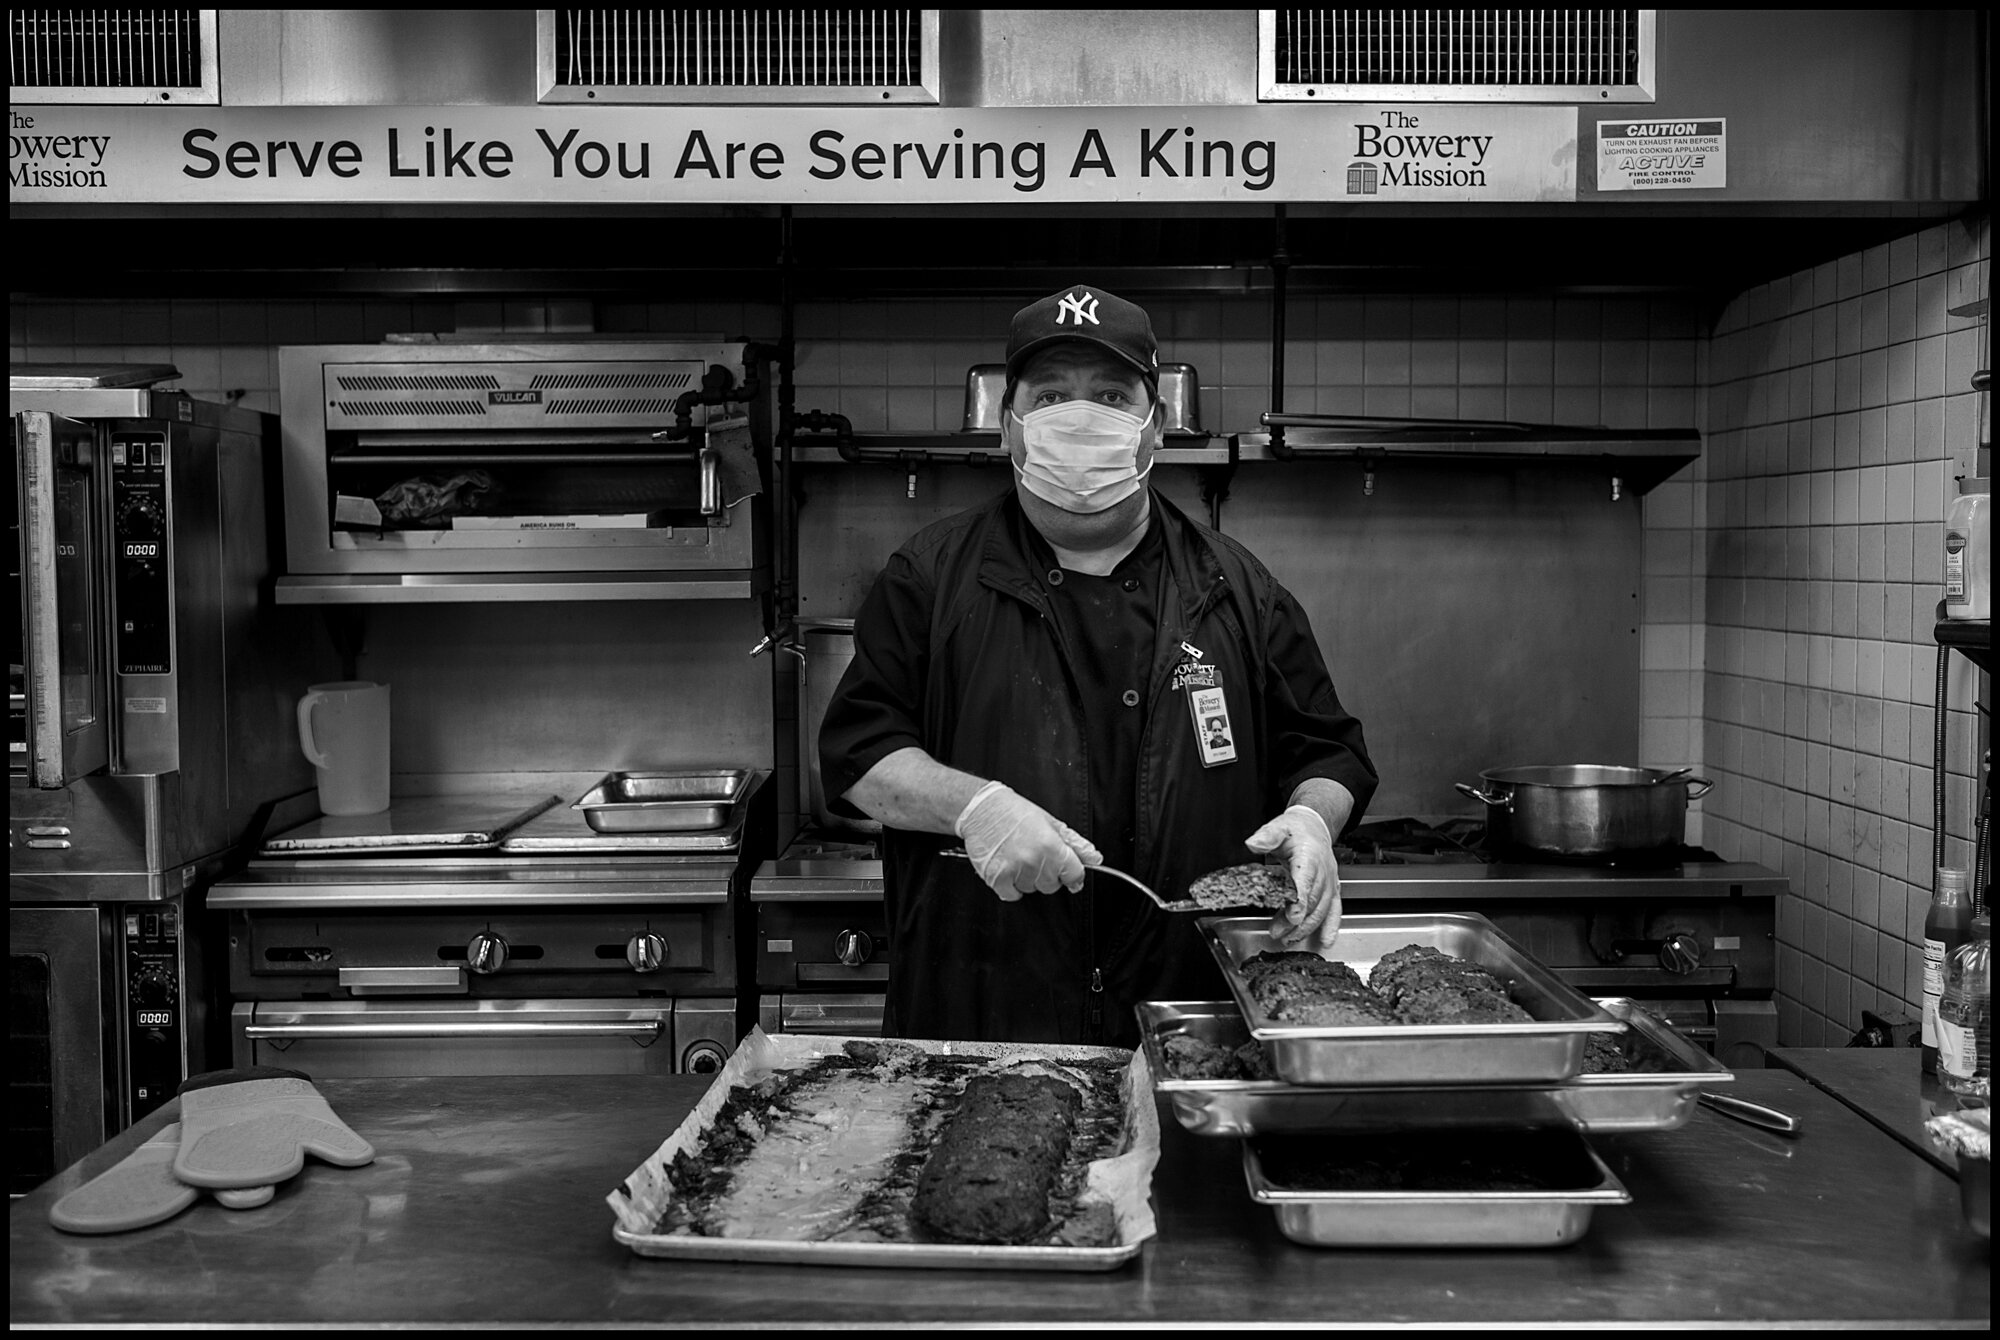  John, 58, a cook at The Bowery Mission.  April 10, 2020. © Peter Turnley  ID# 18-005 